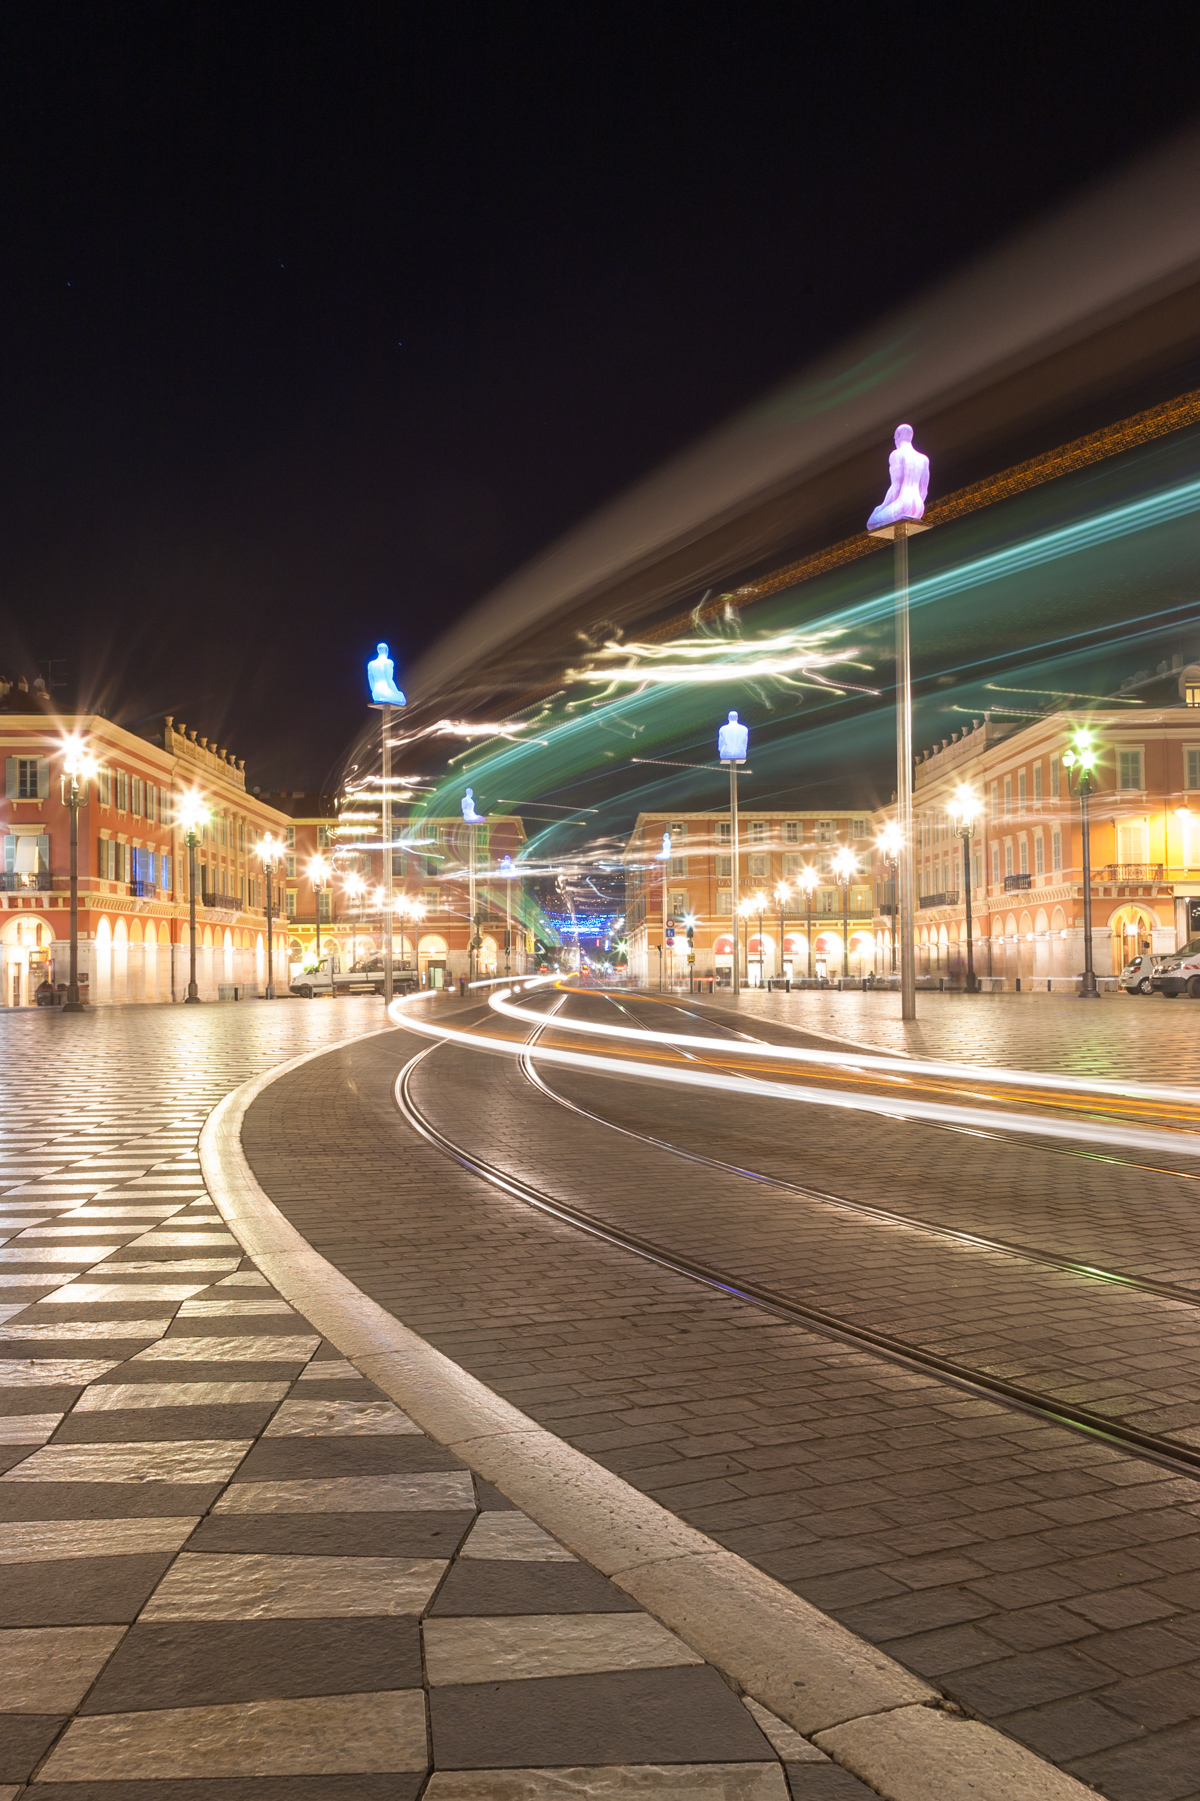 Place Masséna showing art installation of giant glowing buddhas on plinths by Jaume Plensa and long exposure of tram lights